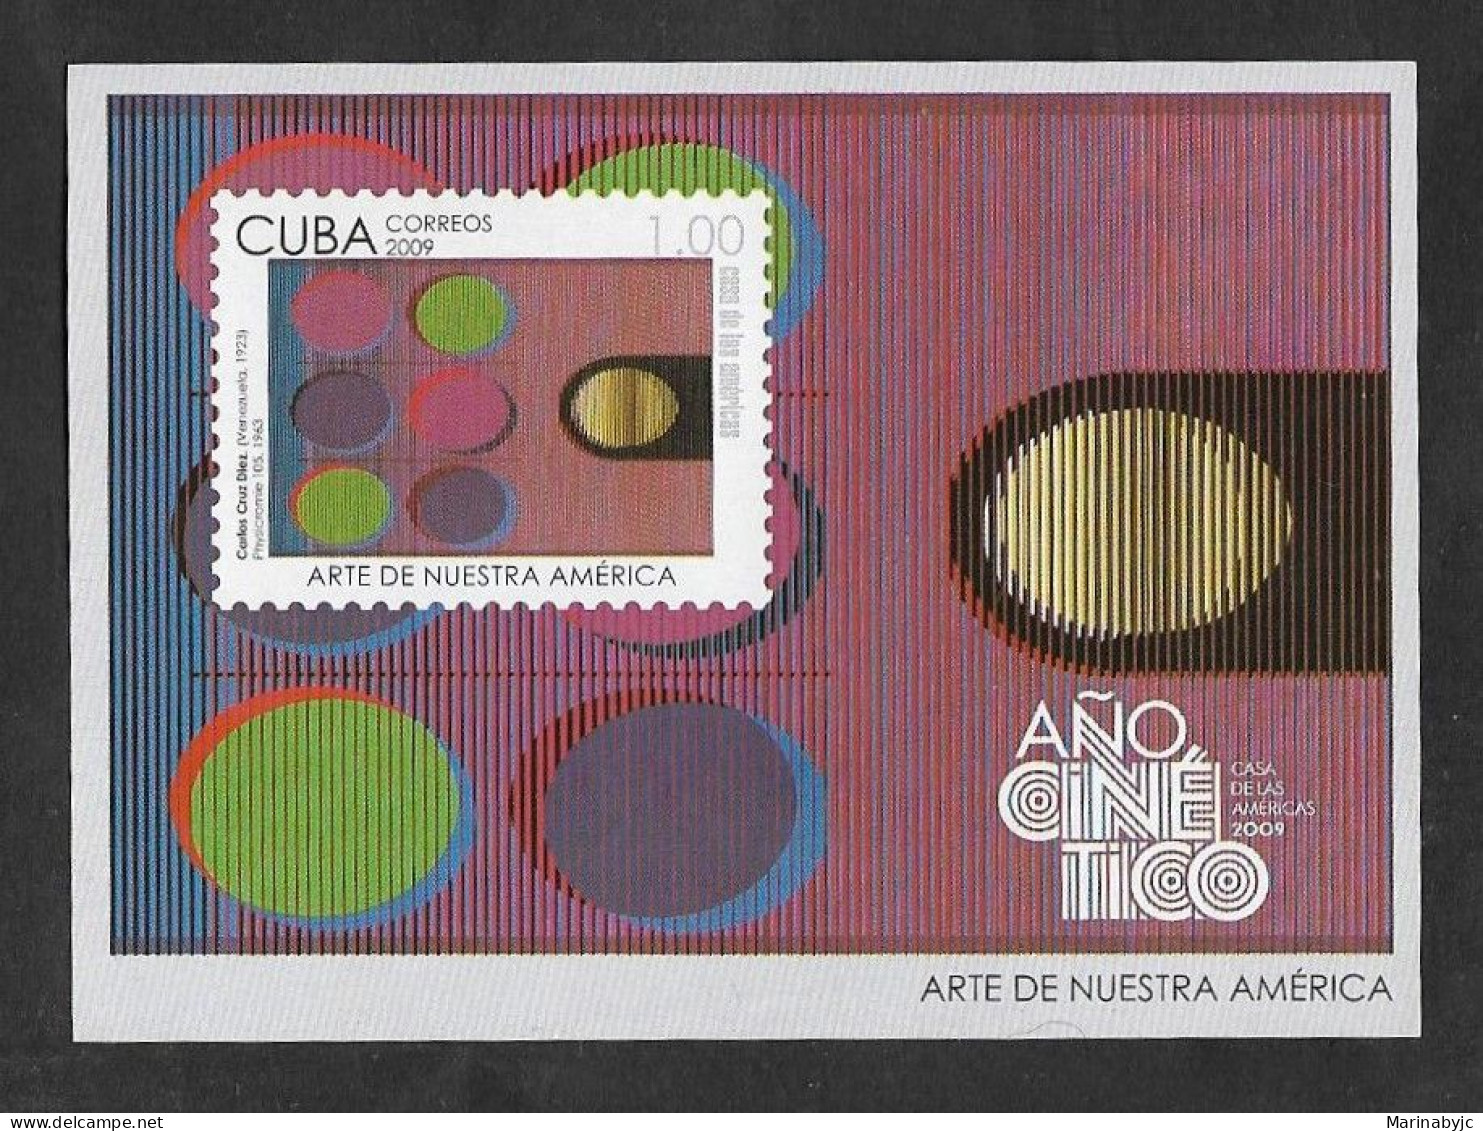 SE)2009 CUBA, FROM THE CINETIC ART SERIES, HOUSE OF THE AMERICAS, SS, MNH - Gebraucht